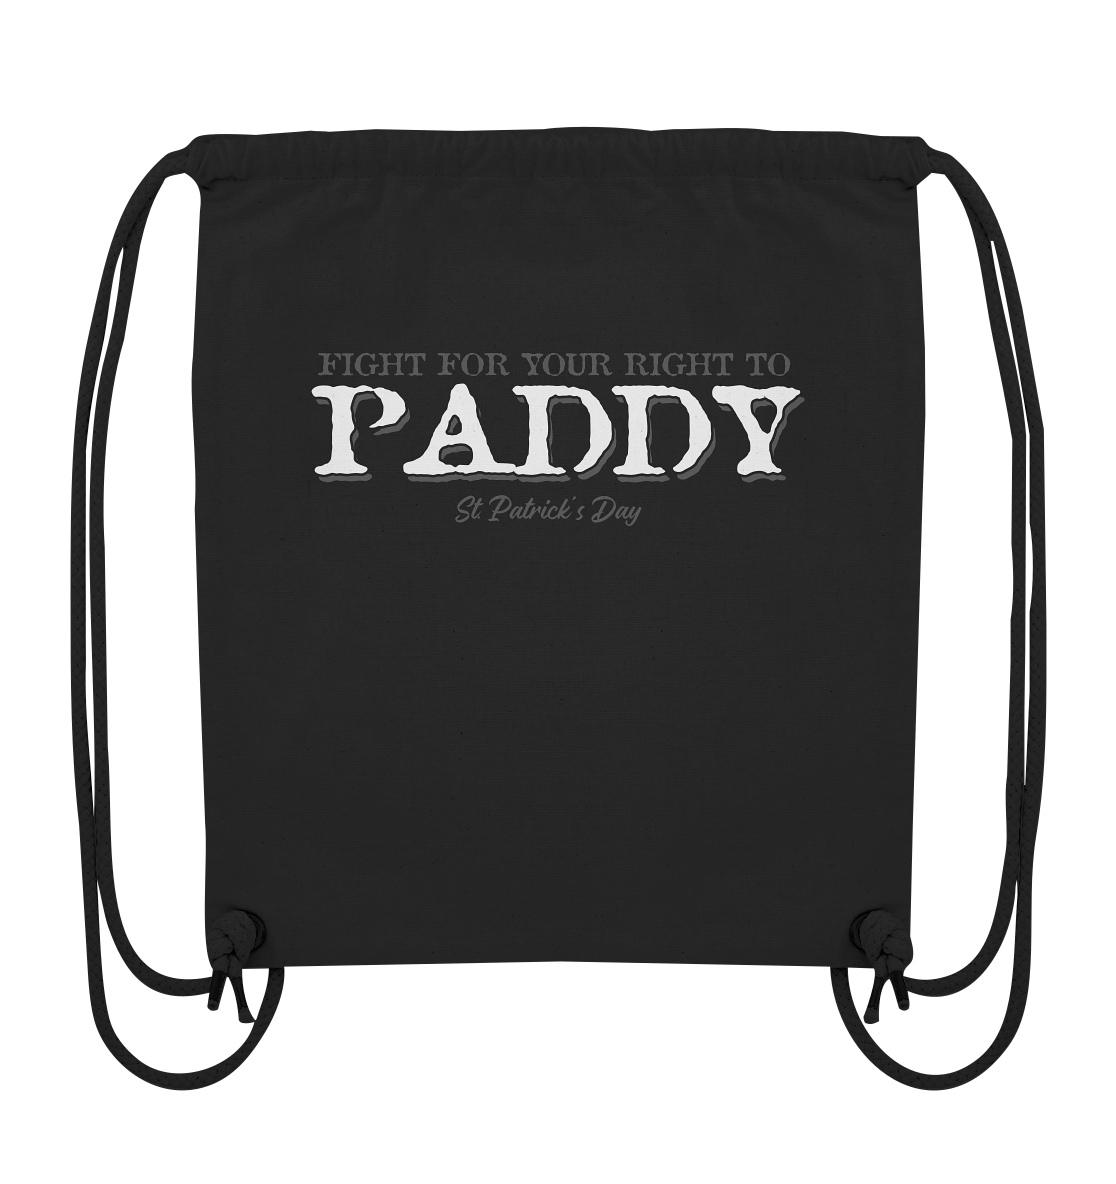 Fight For Your Right To Paddy - Organic Gym-Bag